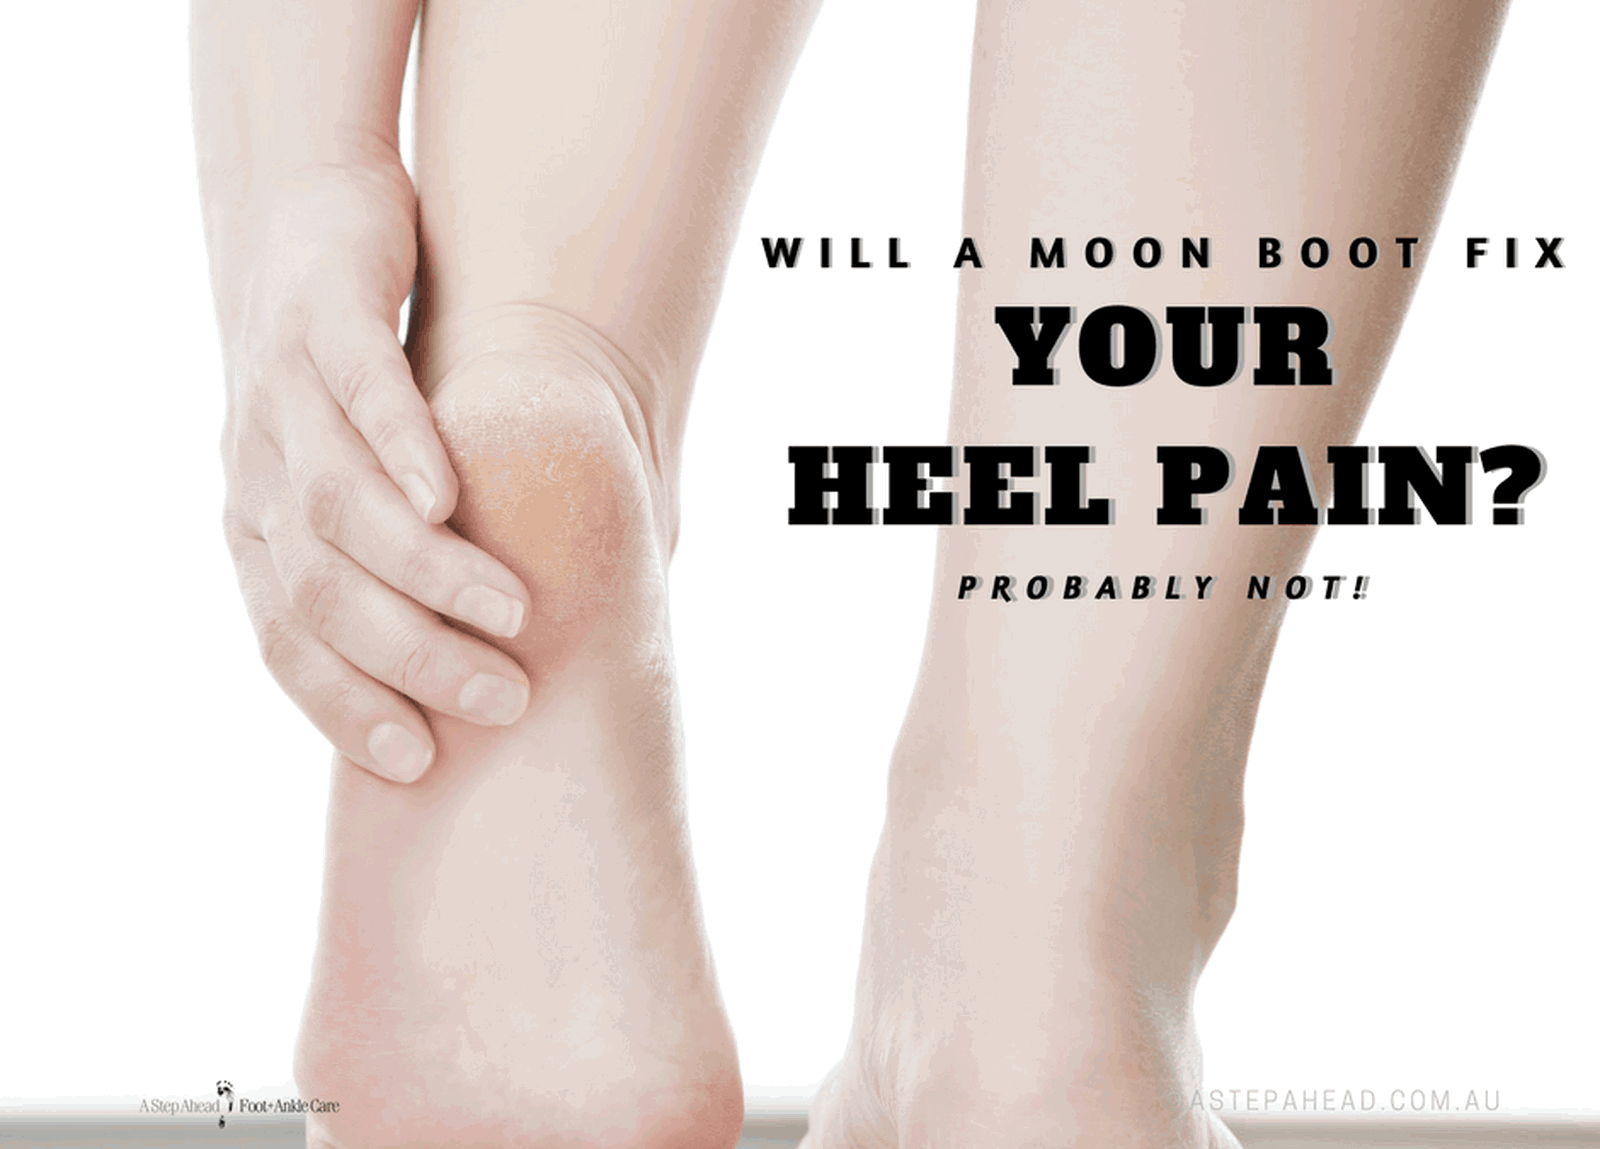 I wear a “Moon Boot” for heel pain 